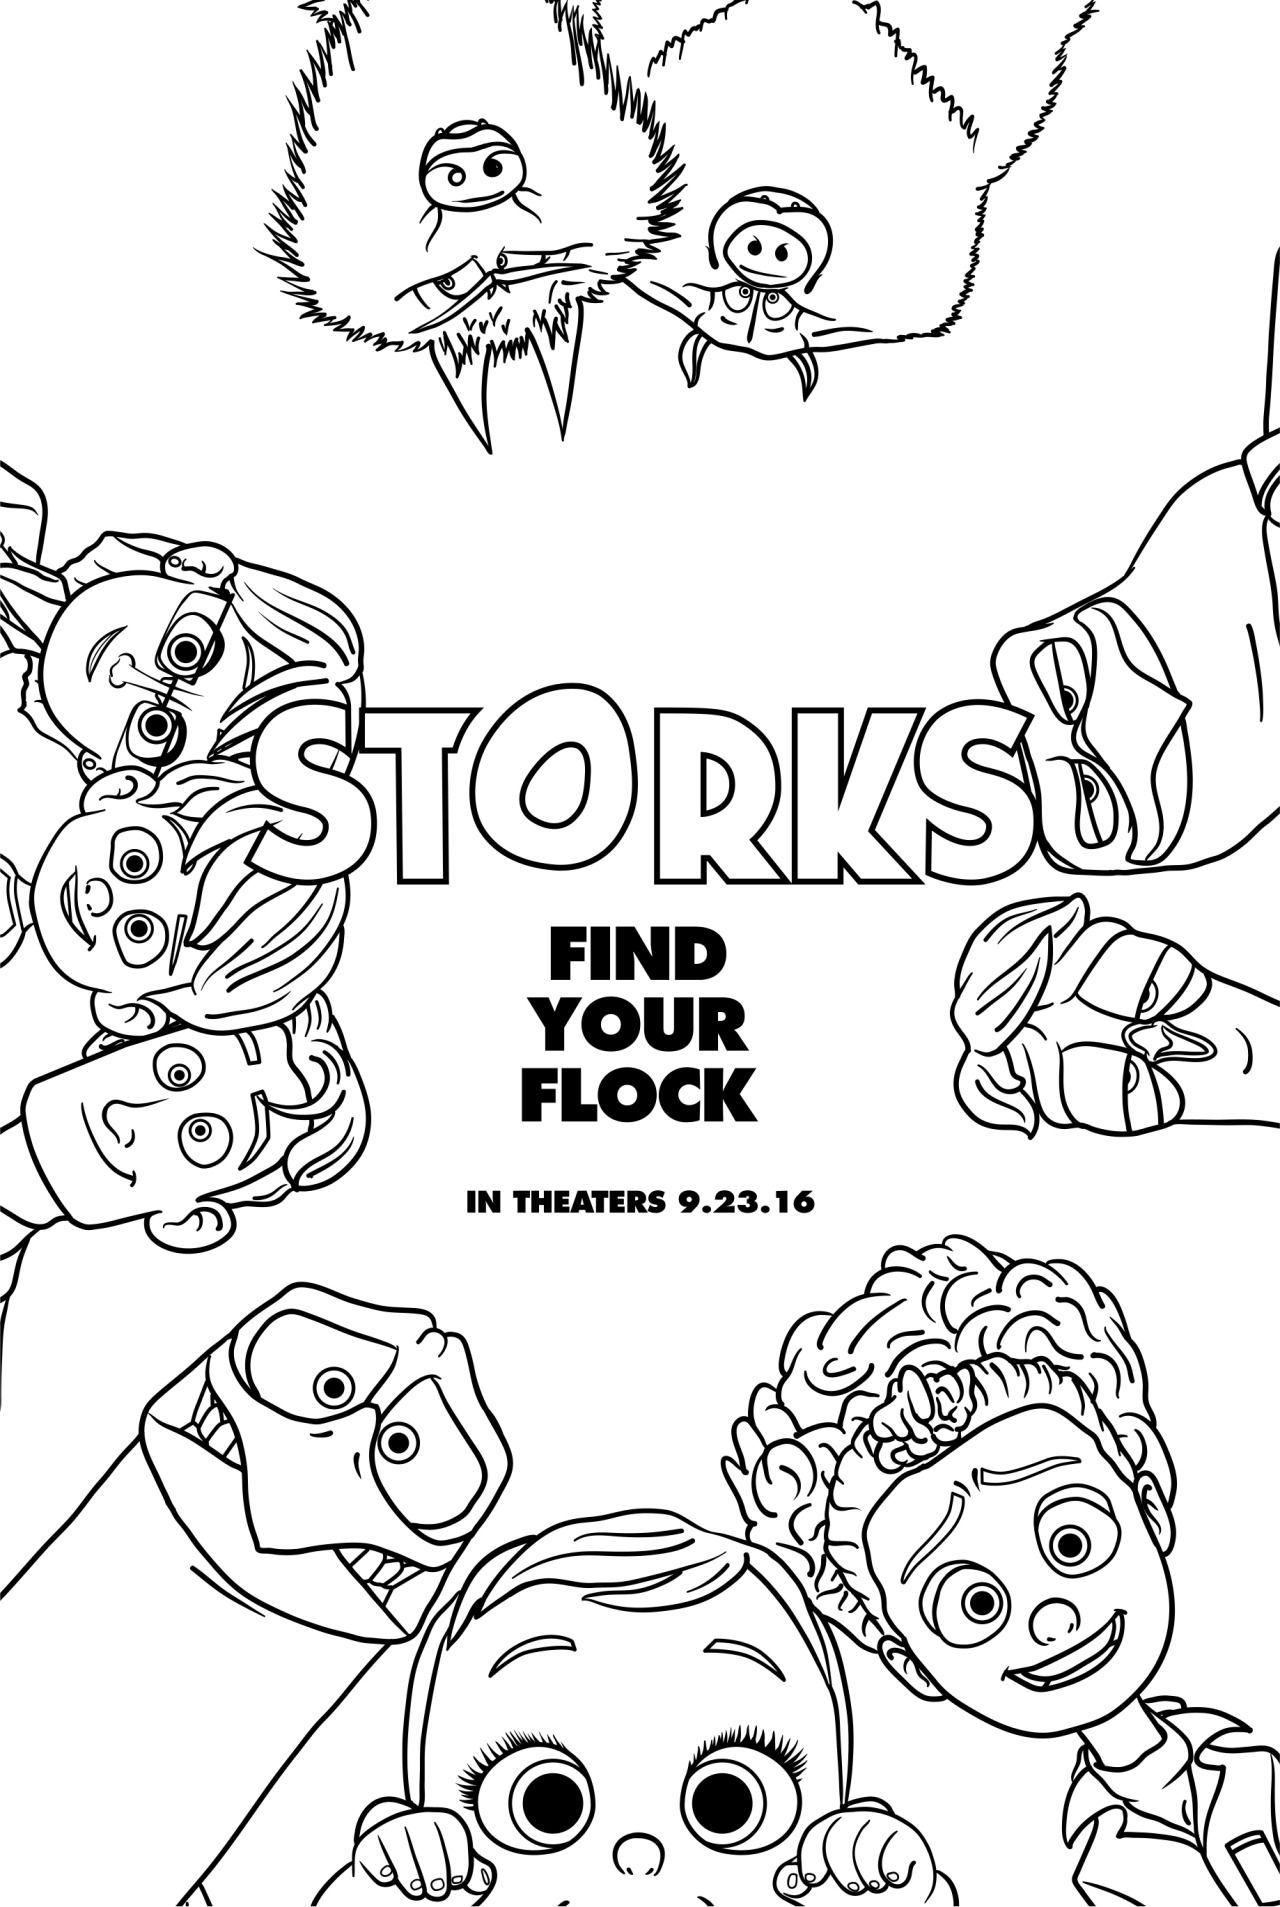 home the movie coloring pages